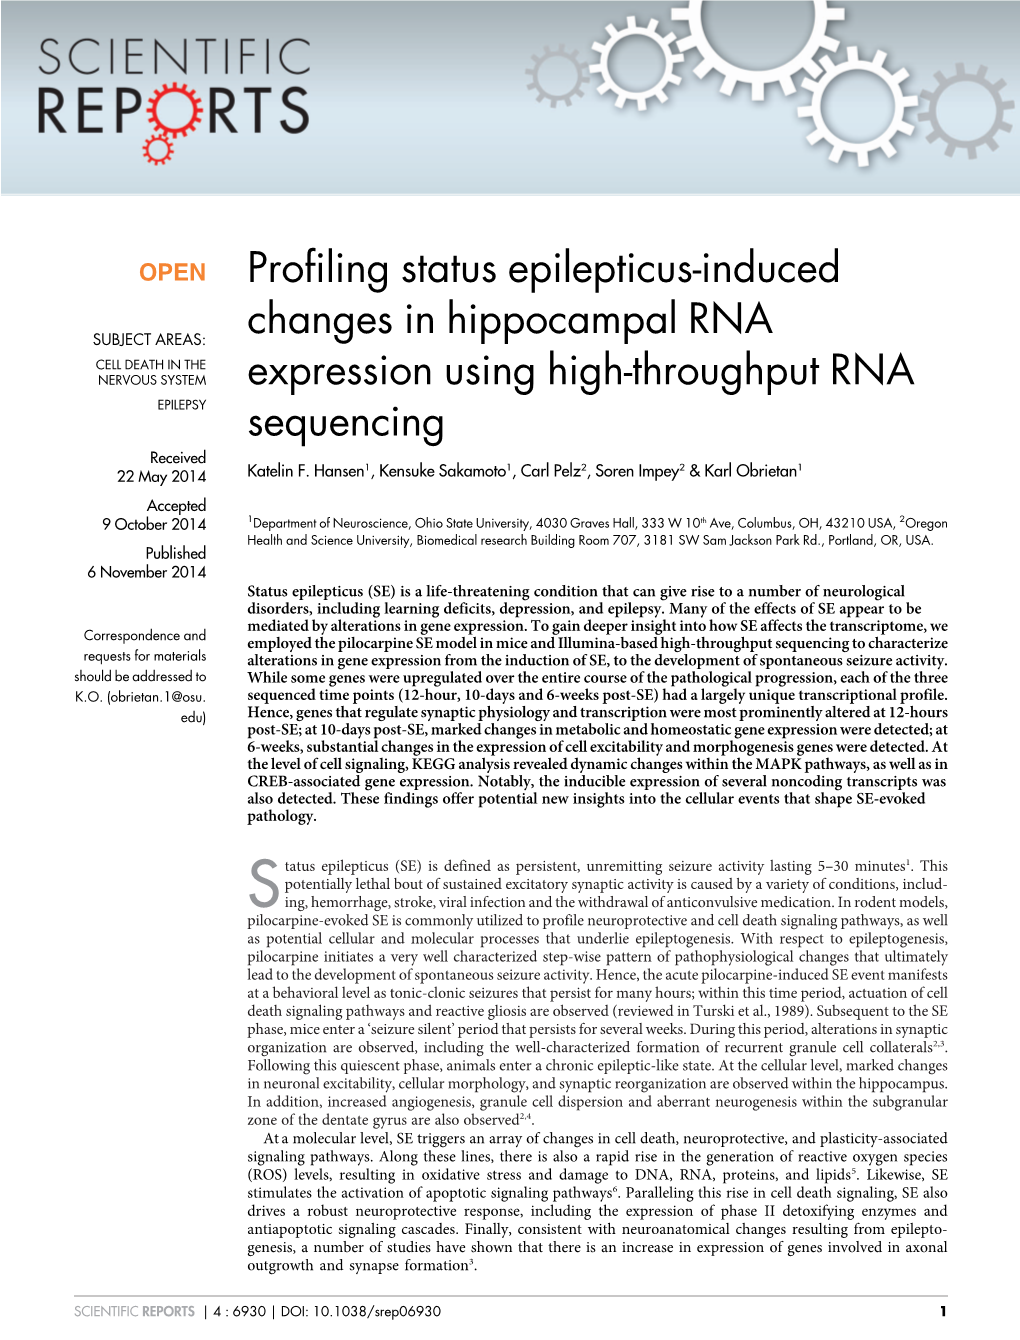 Profiling Status Epilepticus-Induced Changes in Hippocampal RNA Expression Using Res 141, 95–112, Doi:10.1016/J.Molbrainres.2005.08.005 (2005)